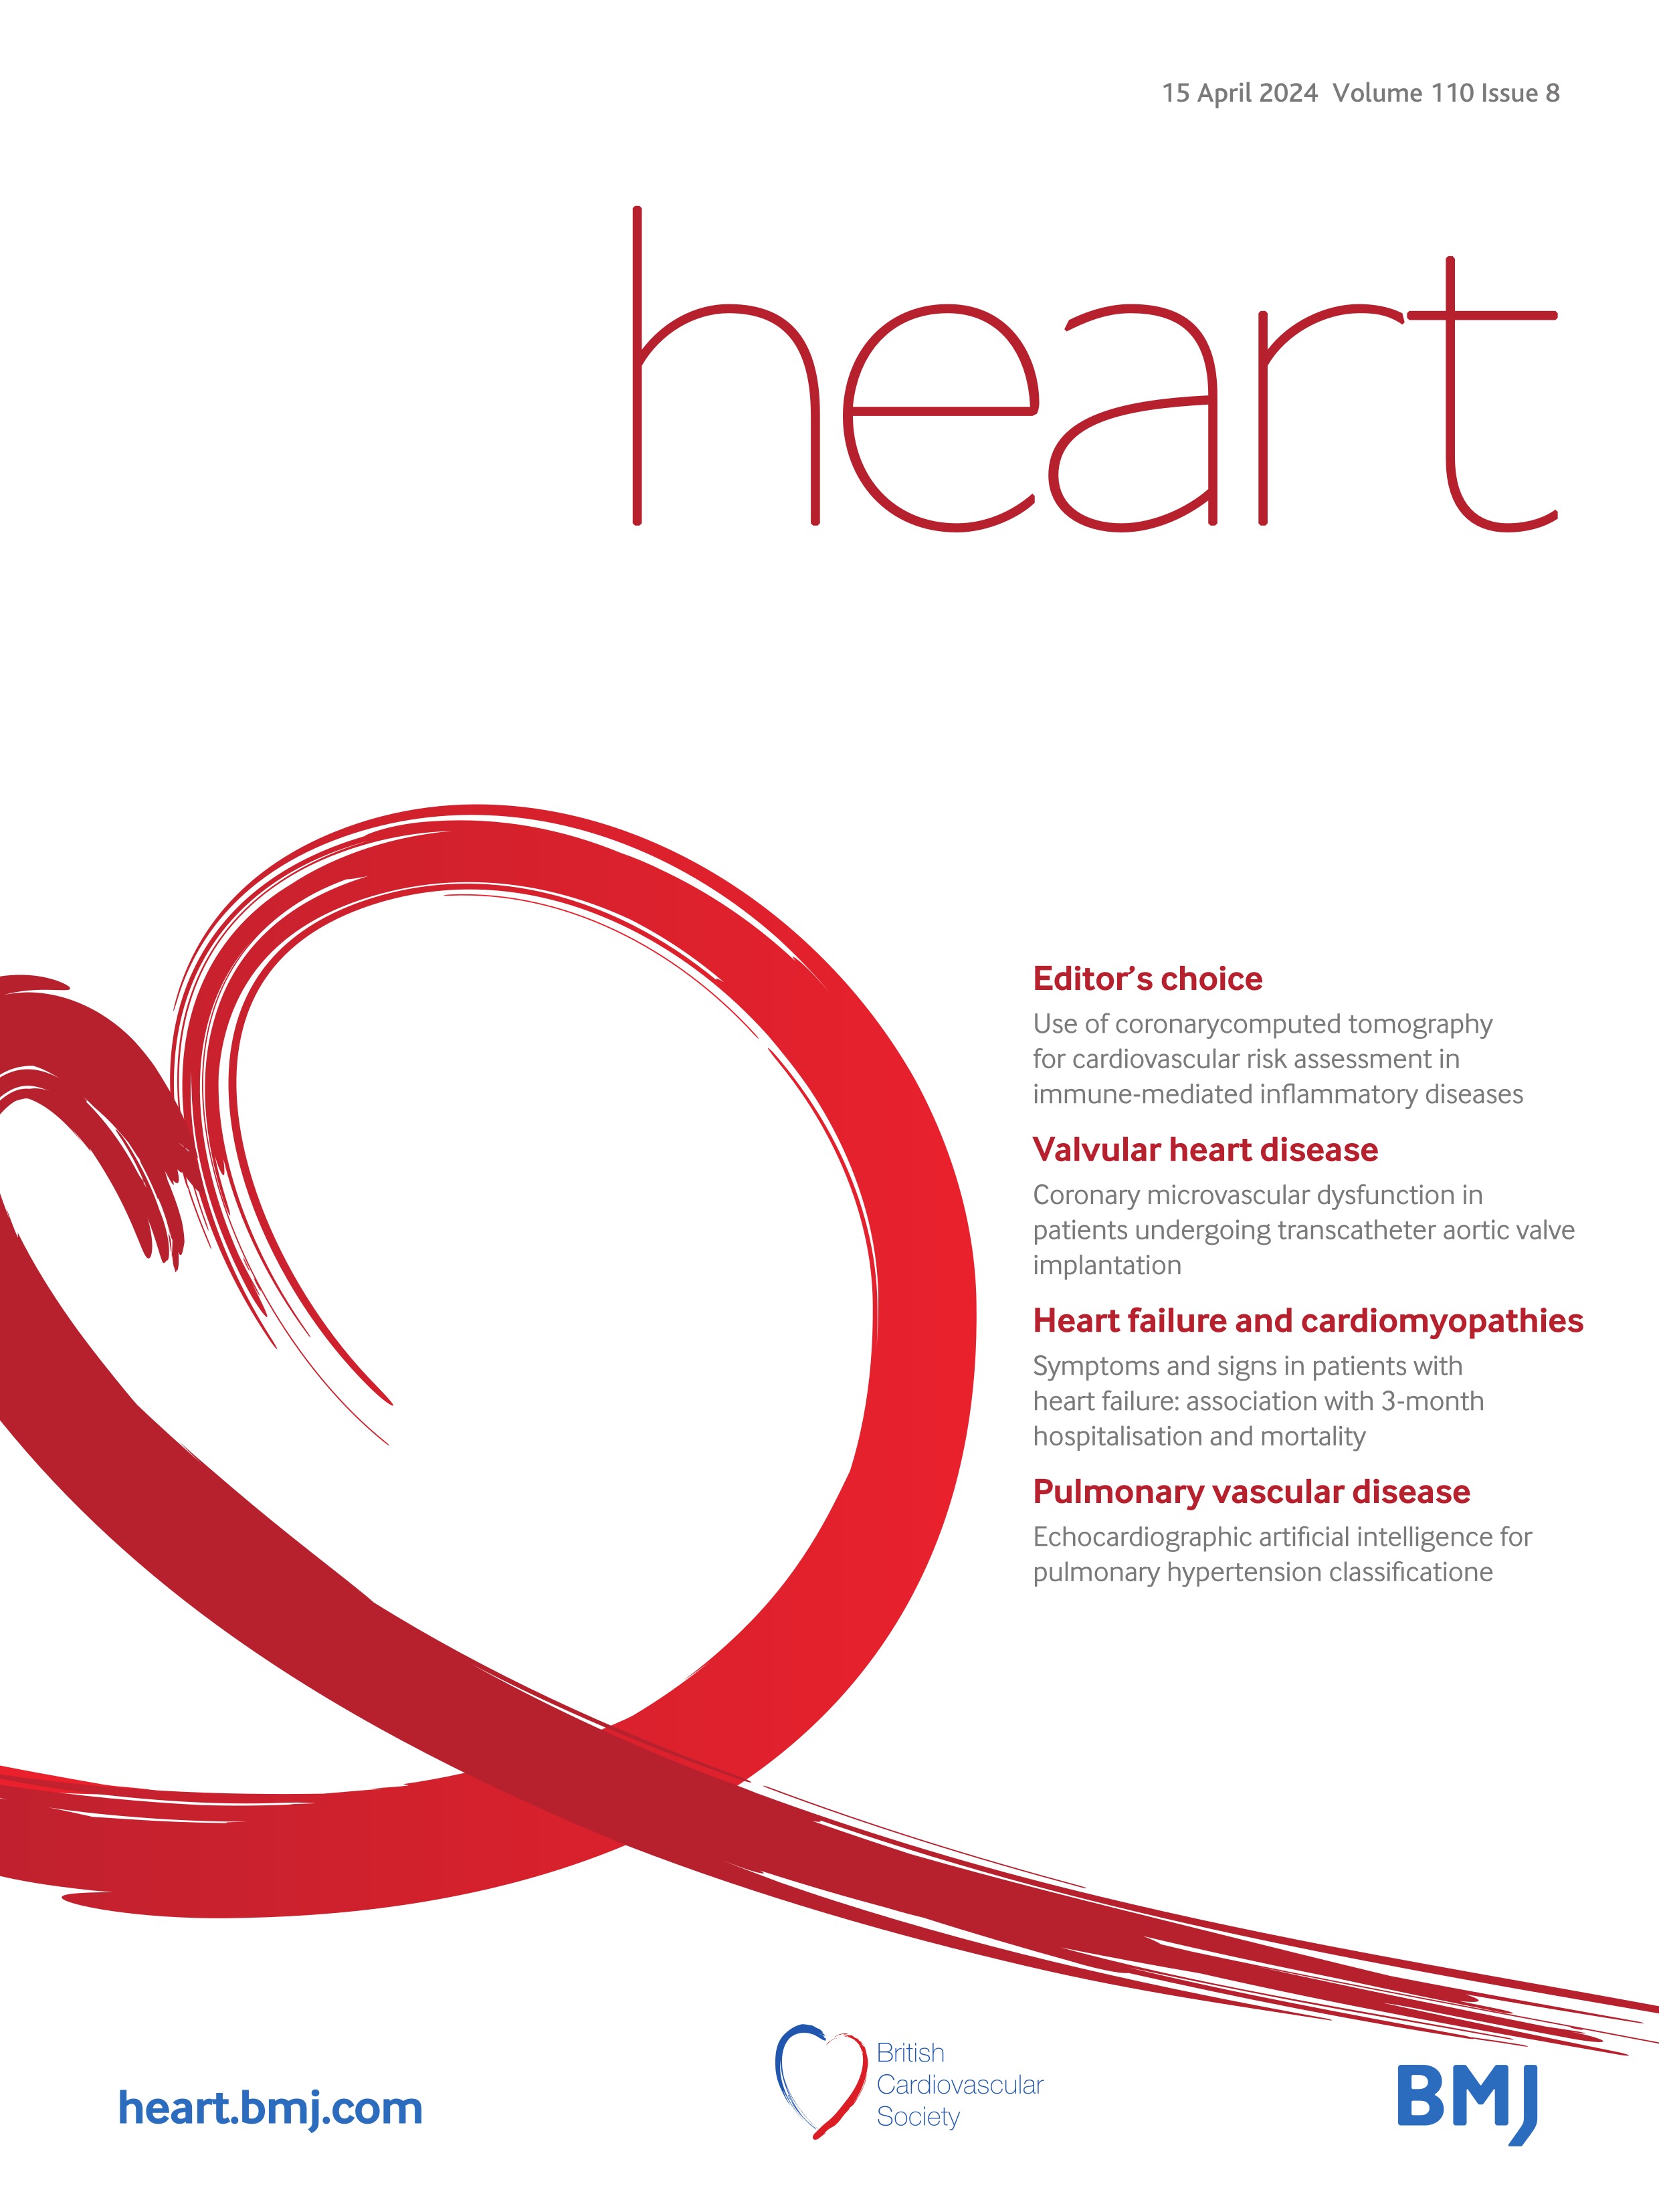 Coronary microvascular dysfunction in patients undergoing transcatheter aortic valve implantation